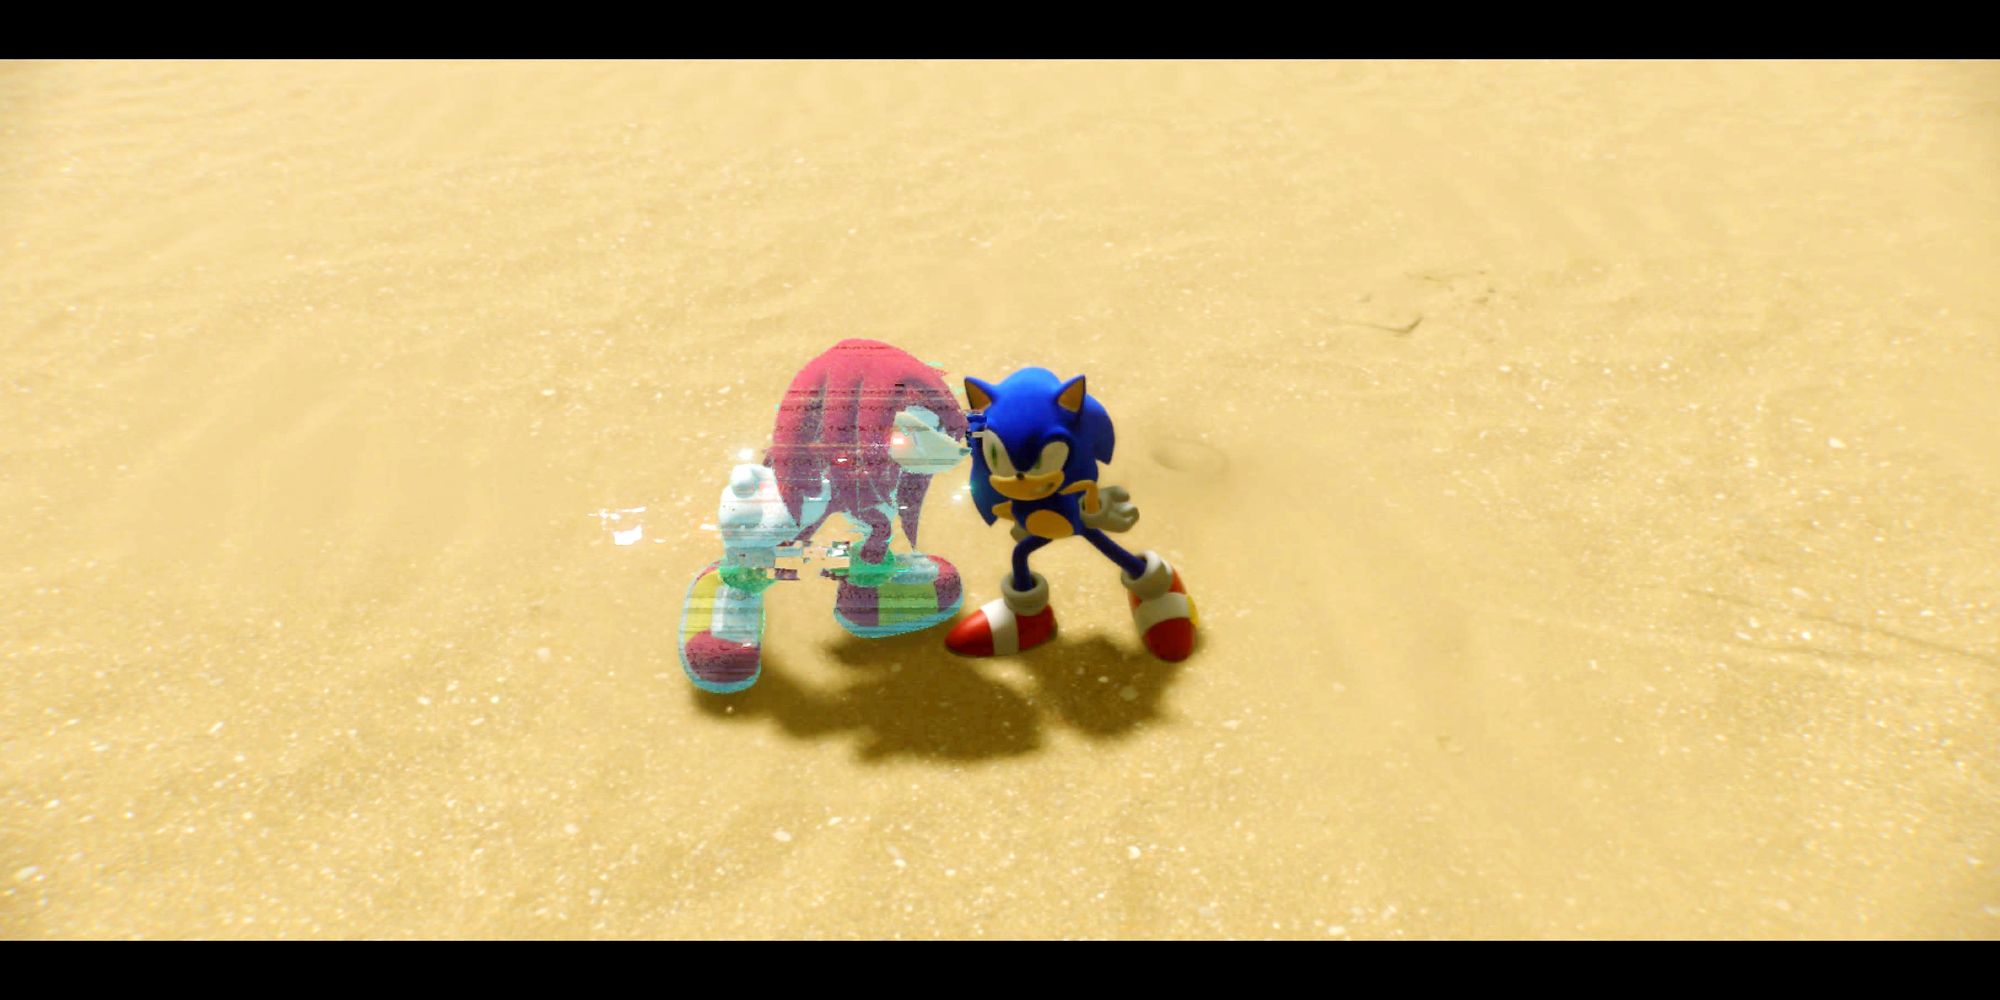 Sonic and Knuckles affectionately posturing at each other in the sand.